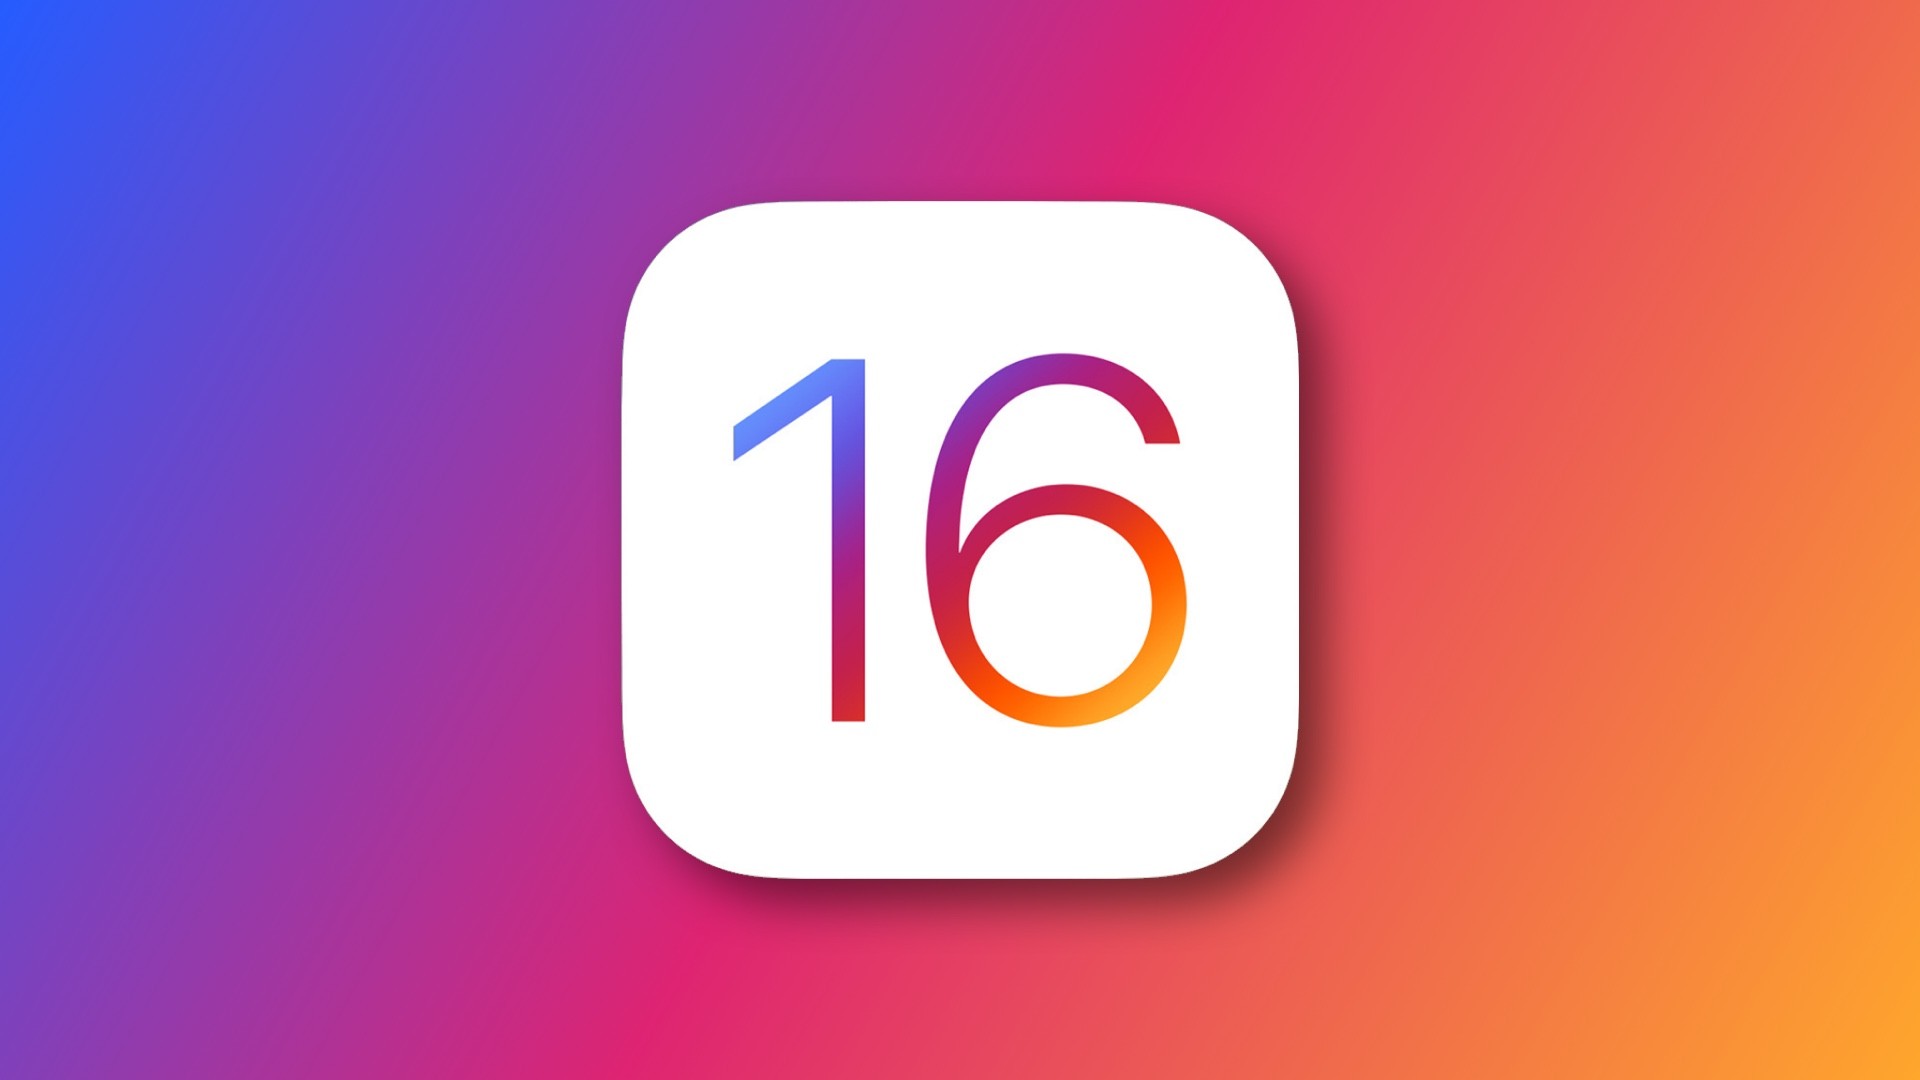 iOS 16: here’s what to expect